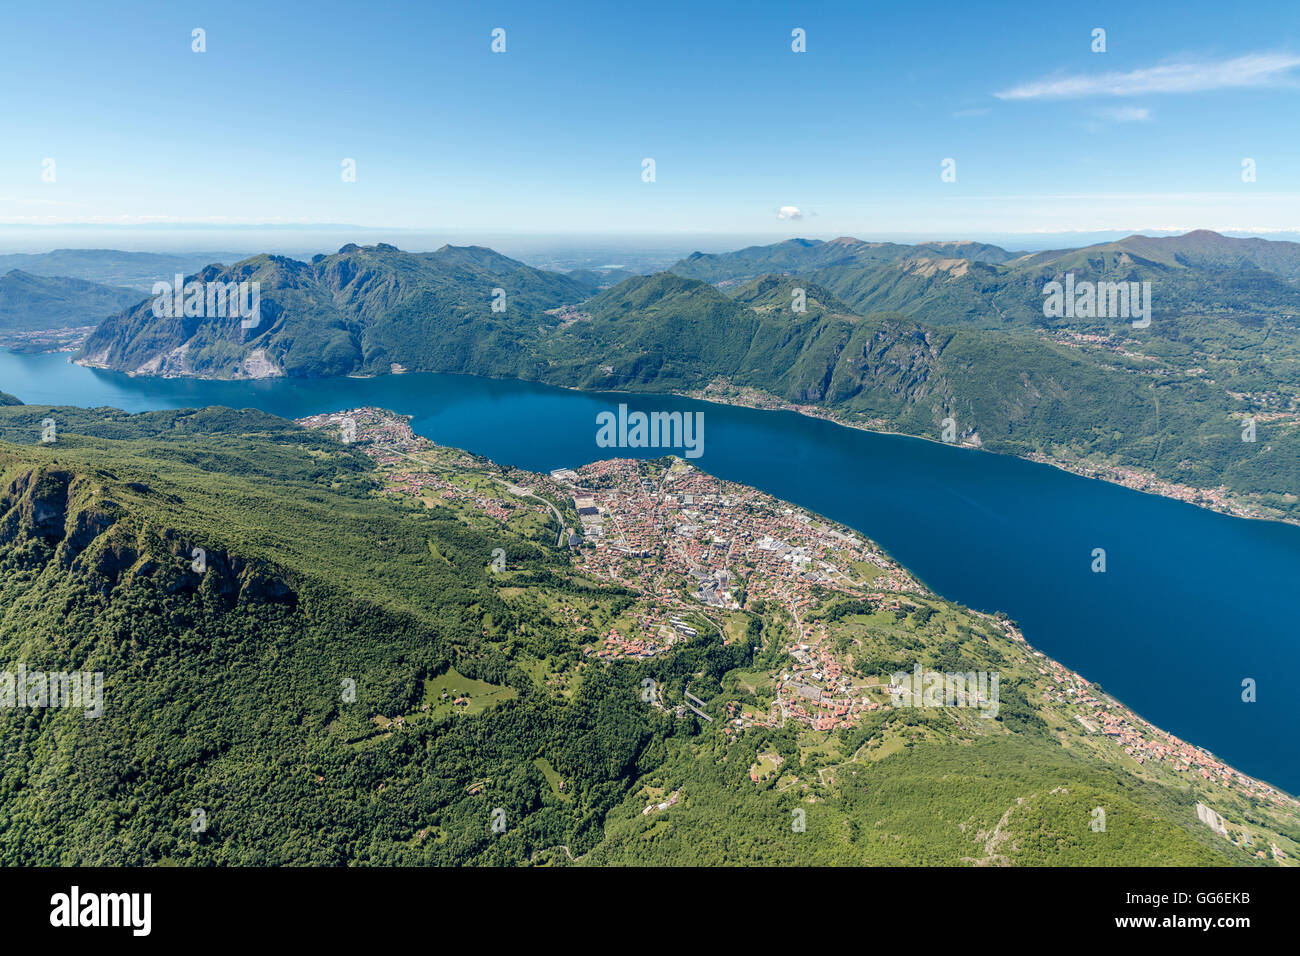 Aerial view of the villages Mandello del Lario and Abbadia Lariana overlooking Lake Como, Lecco Province, Lombardy, Italy Stock Photo